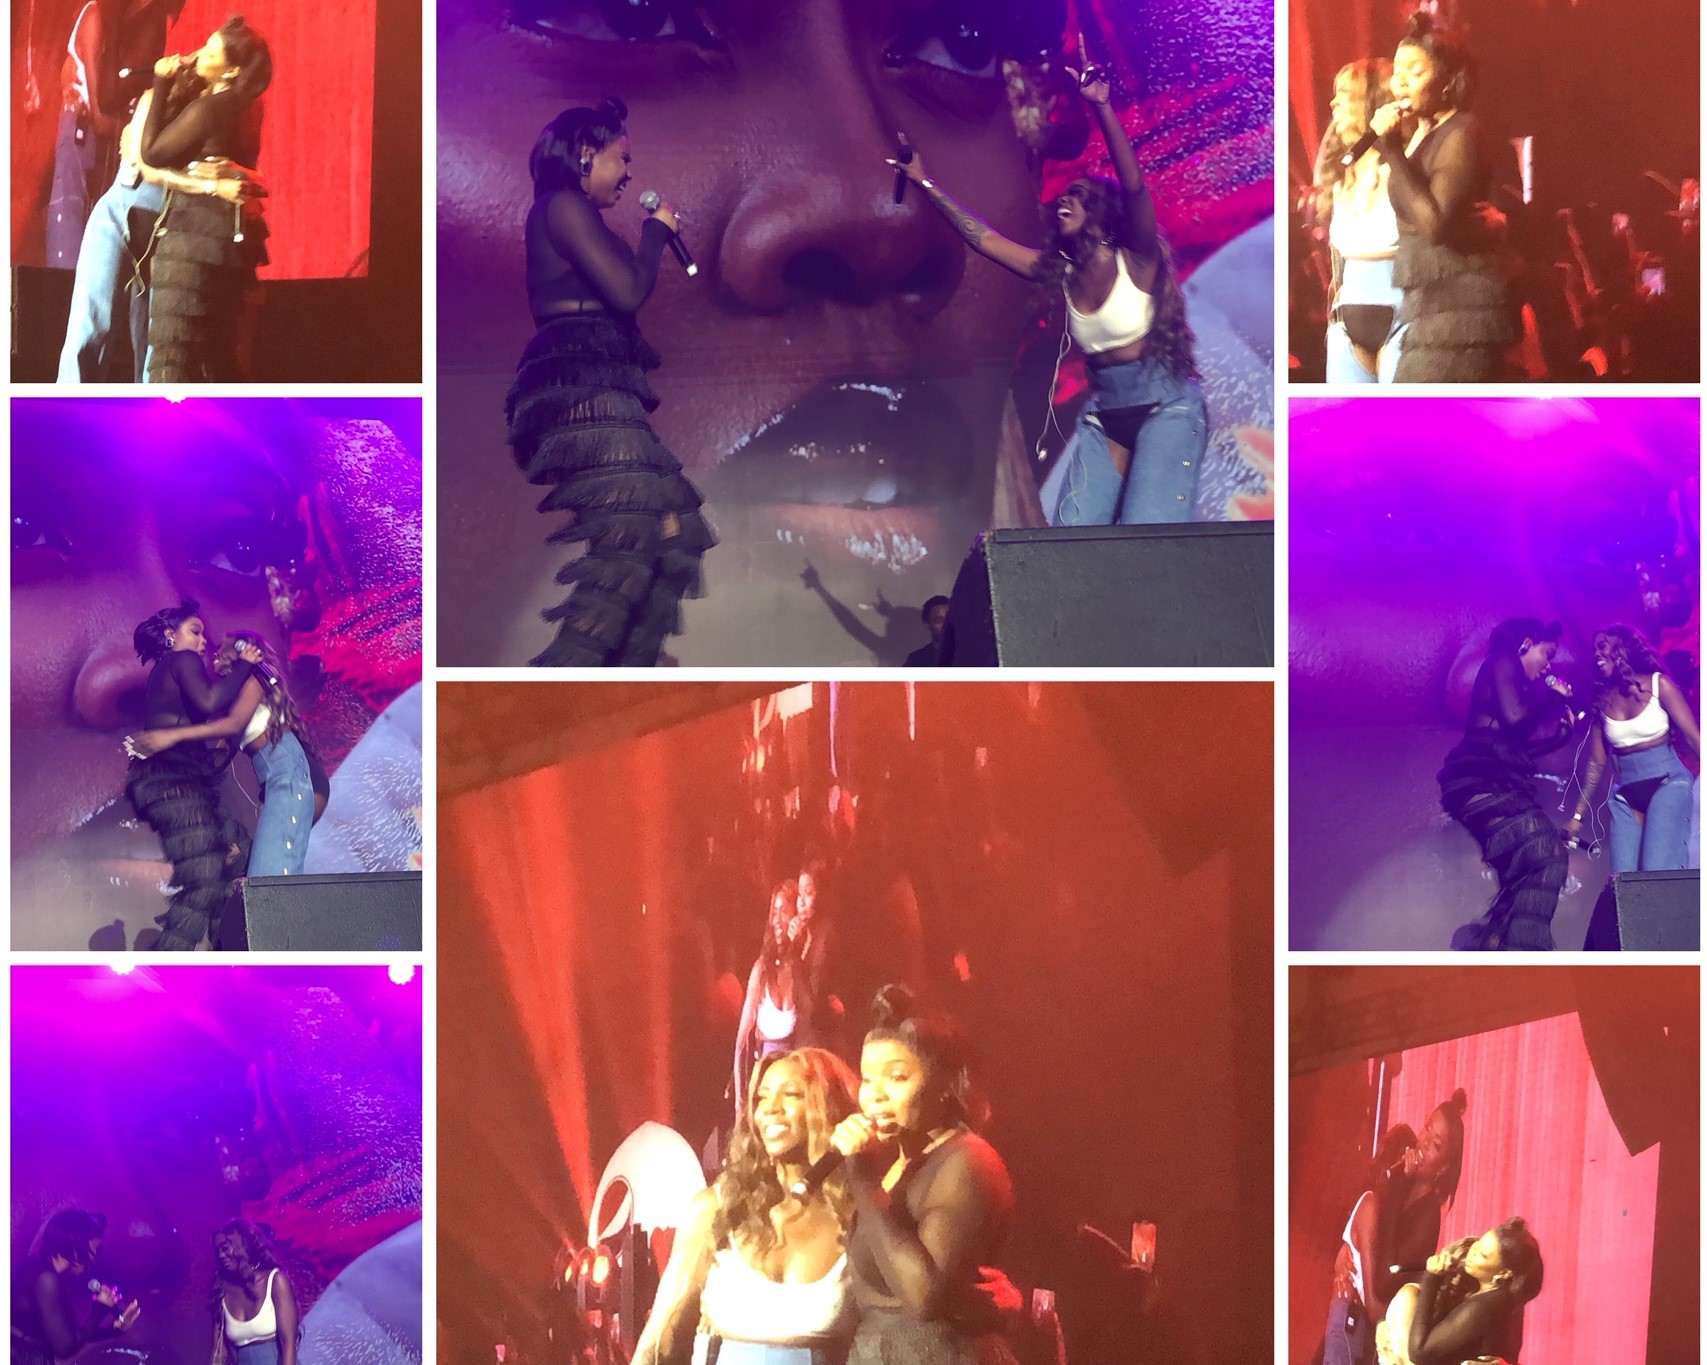 Tiwa Savage & Yemi Alade Beautiful Moment Together On Stage For The First Time!